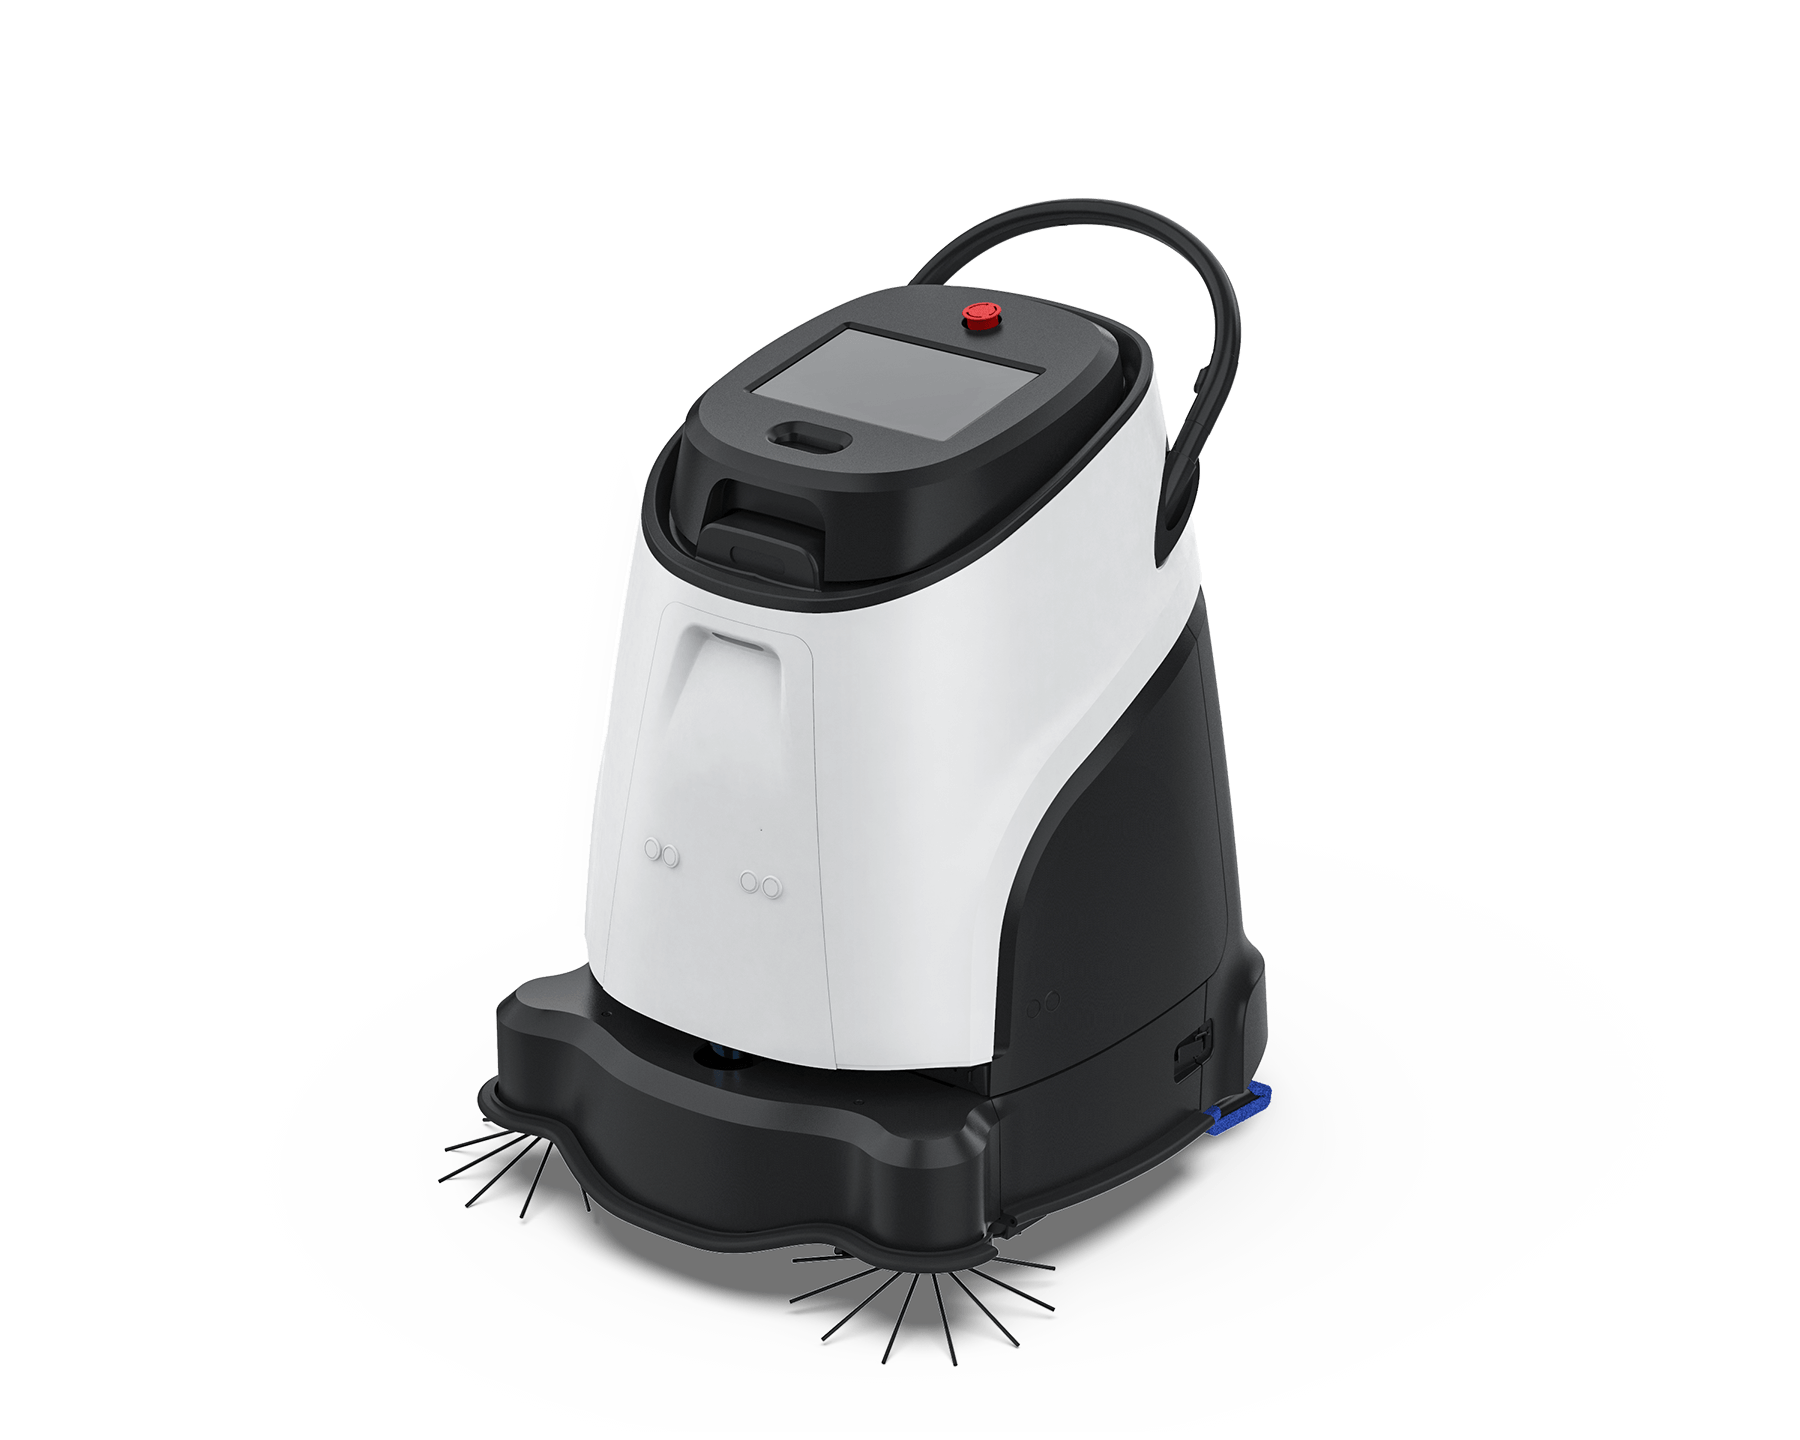 Vacuum 40 Pro vacuum cleaner robot vacuums autonomously and cleans professionally automatically